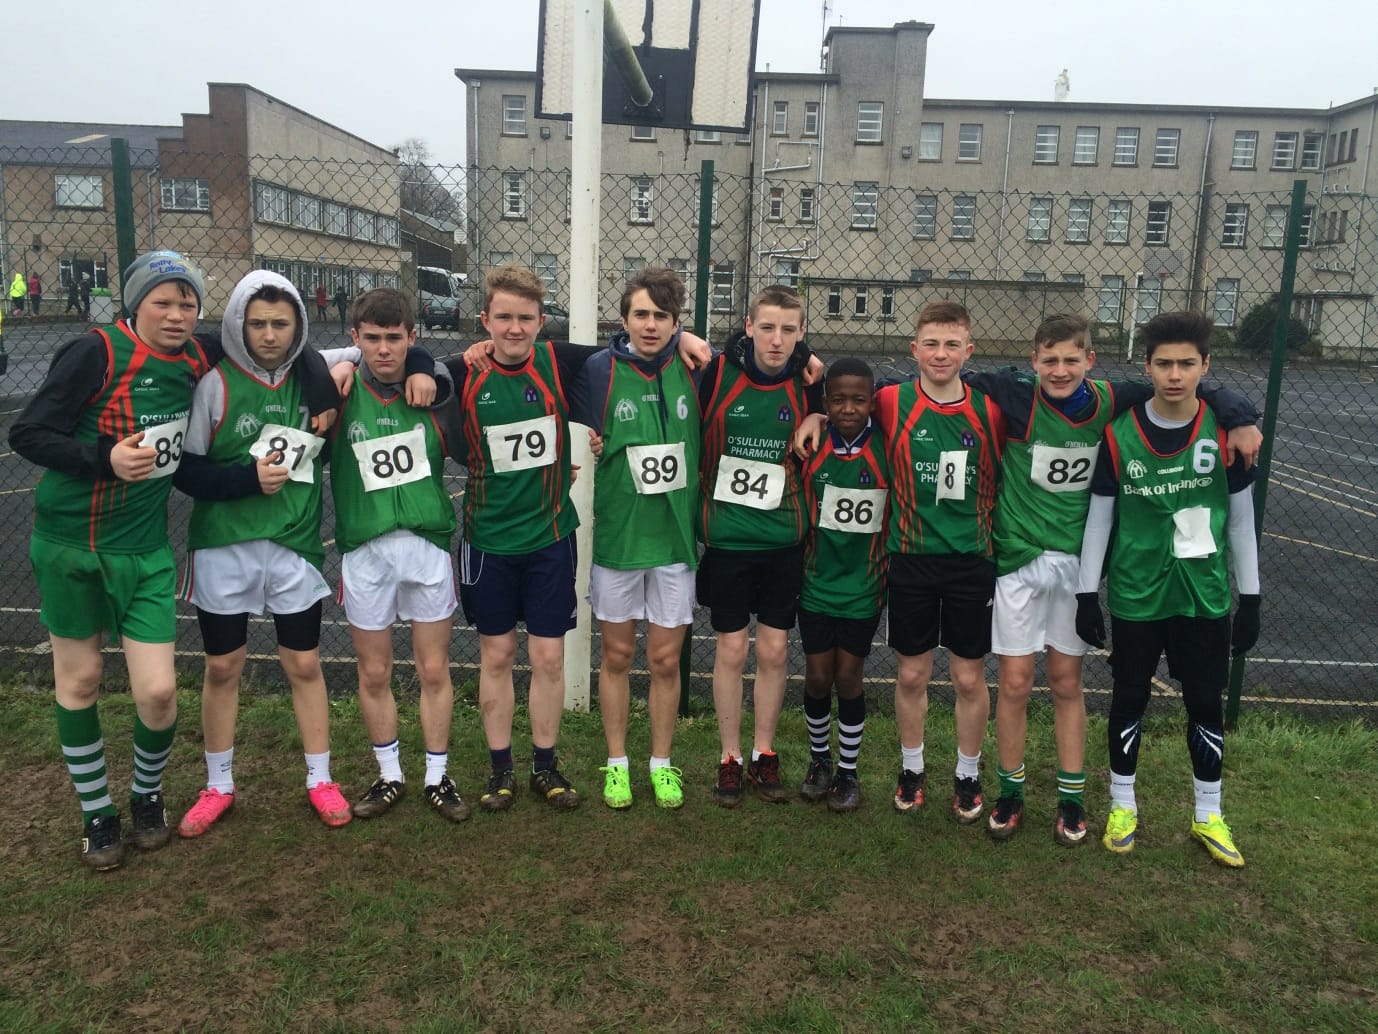 Desmond College Boys U15 Team at the North Munster Cross Country Championships in Pallaskenry recently